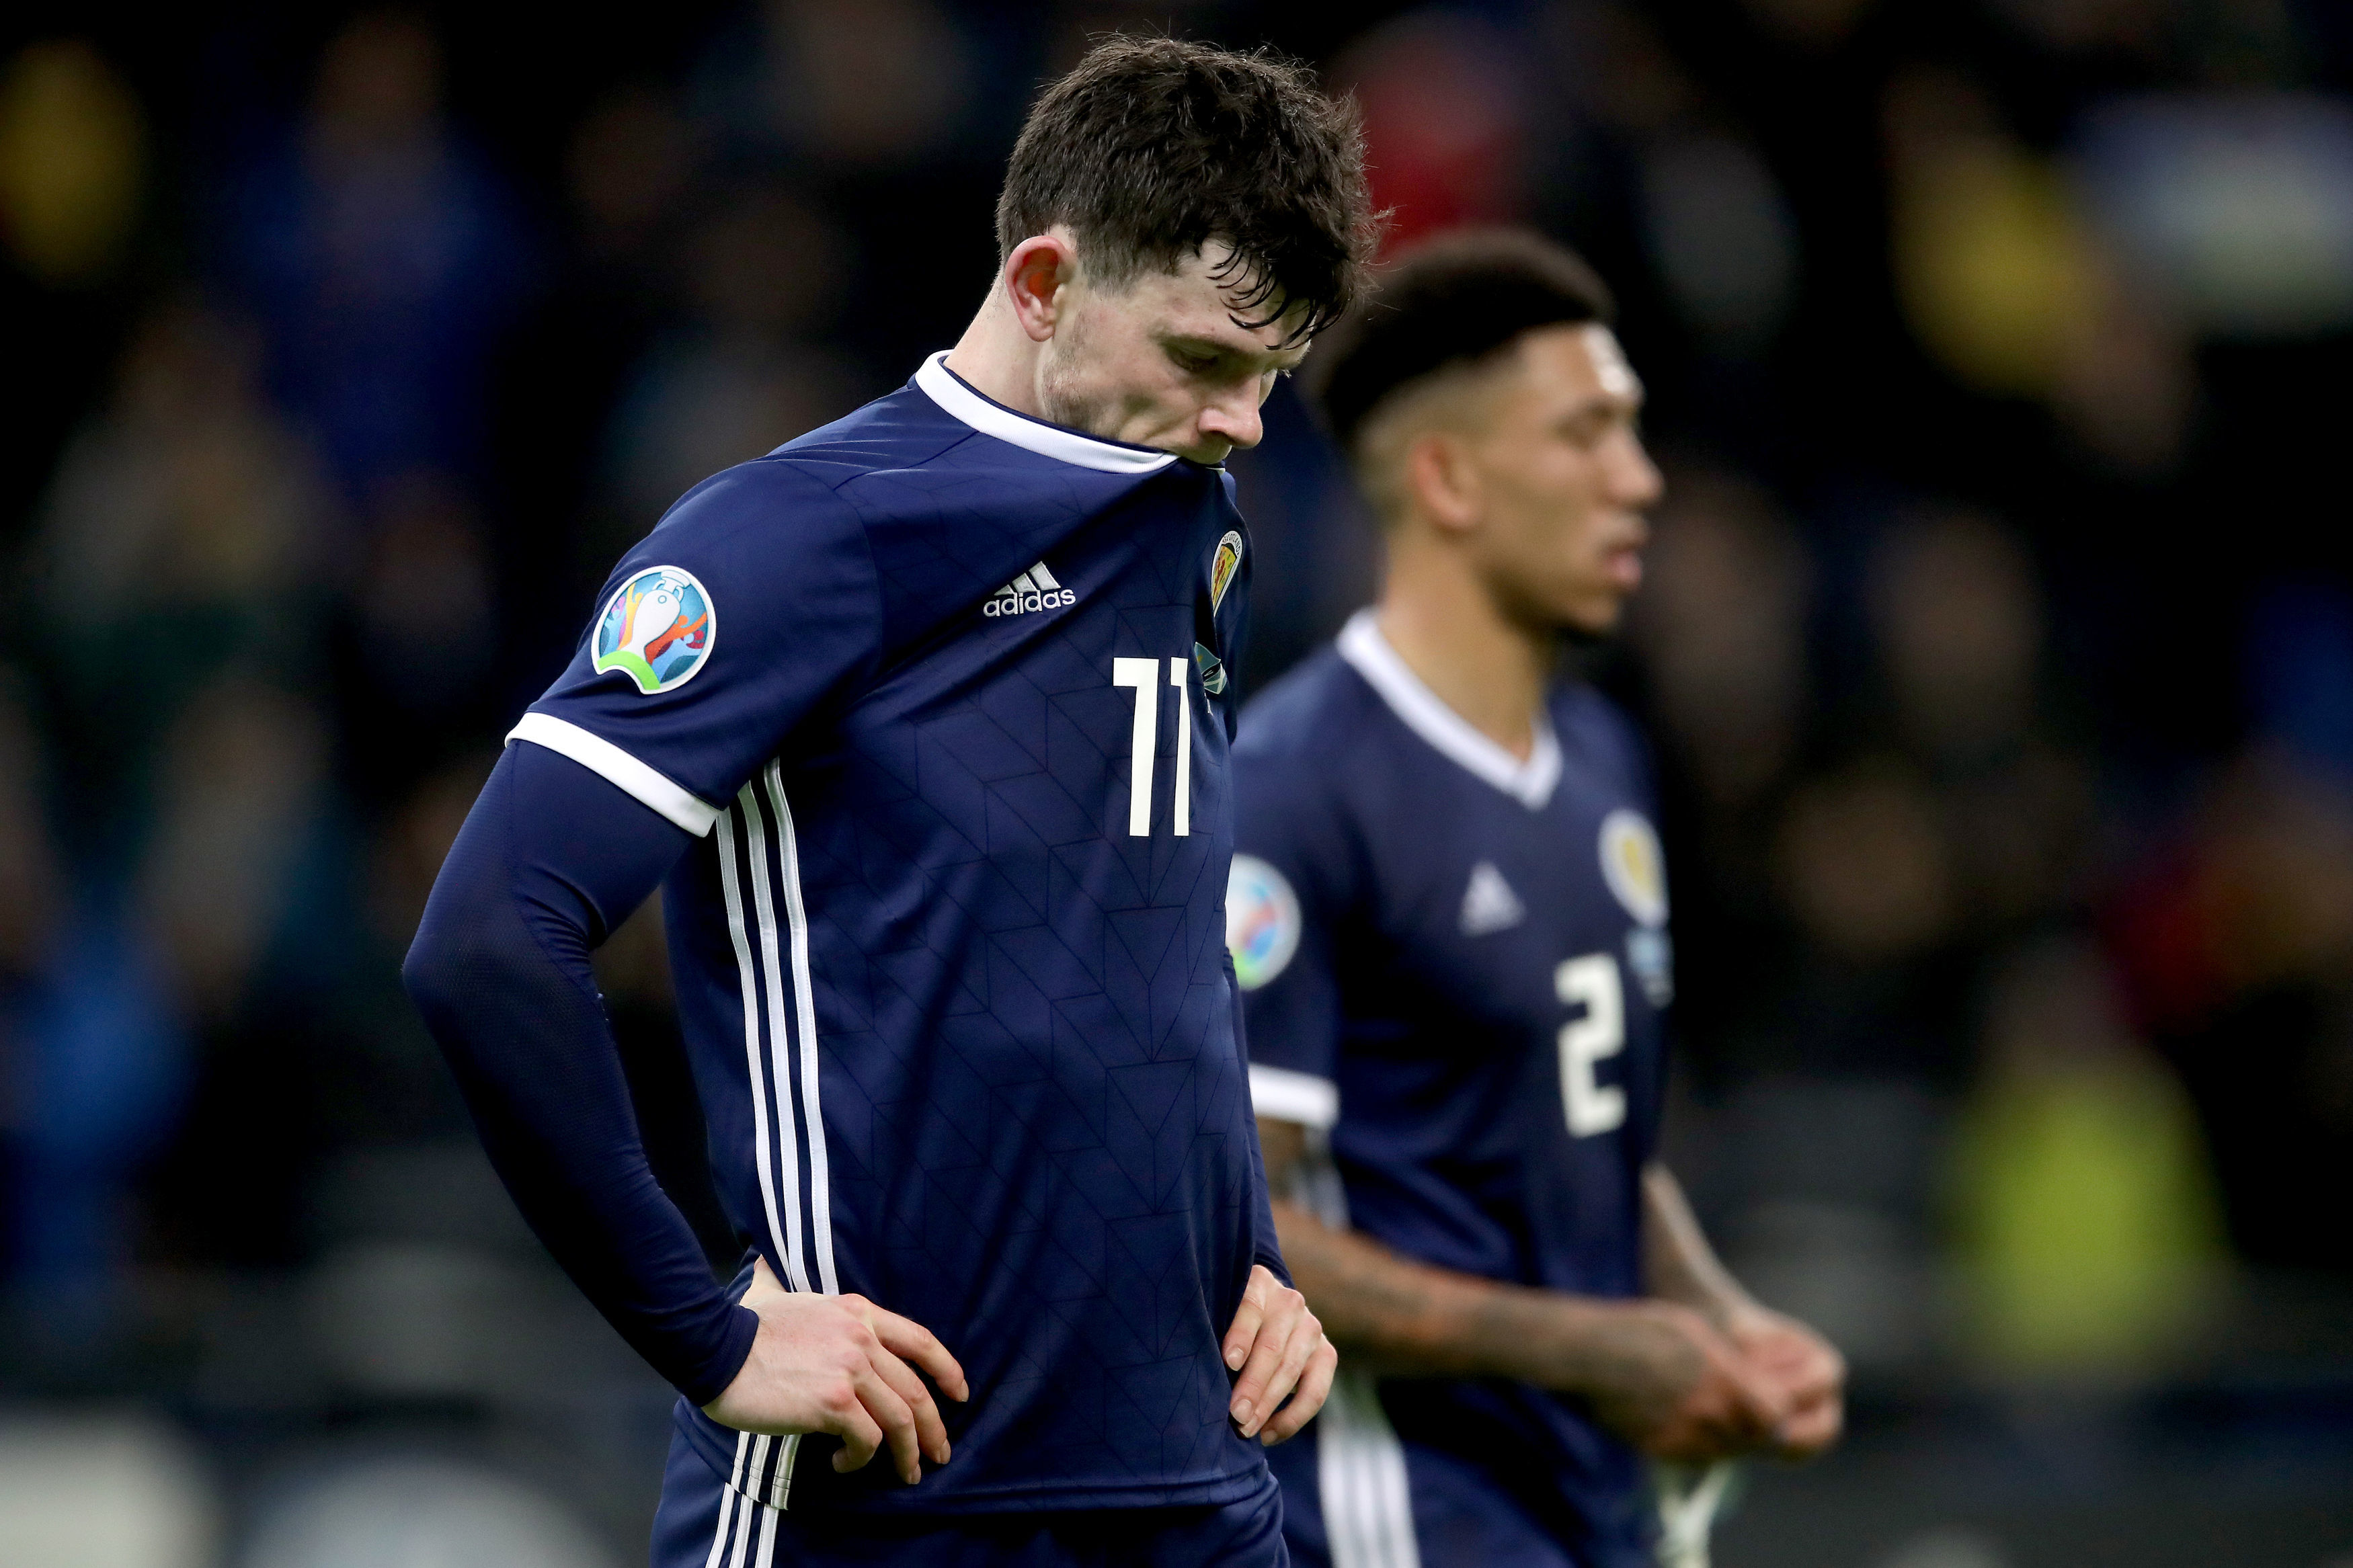 Scotland's Oliver Burke appears dejected during the UEFA Euro 2020 Qualifying, Group I match at the Astana Arena.